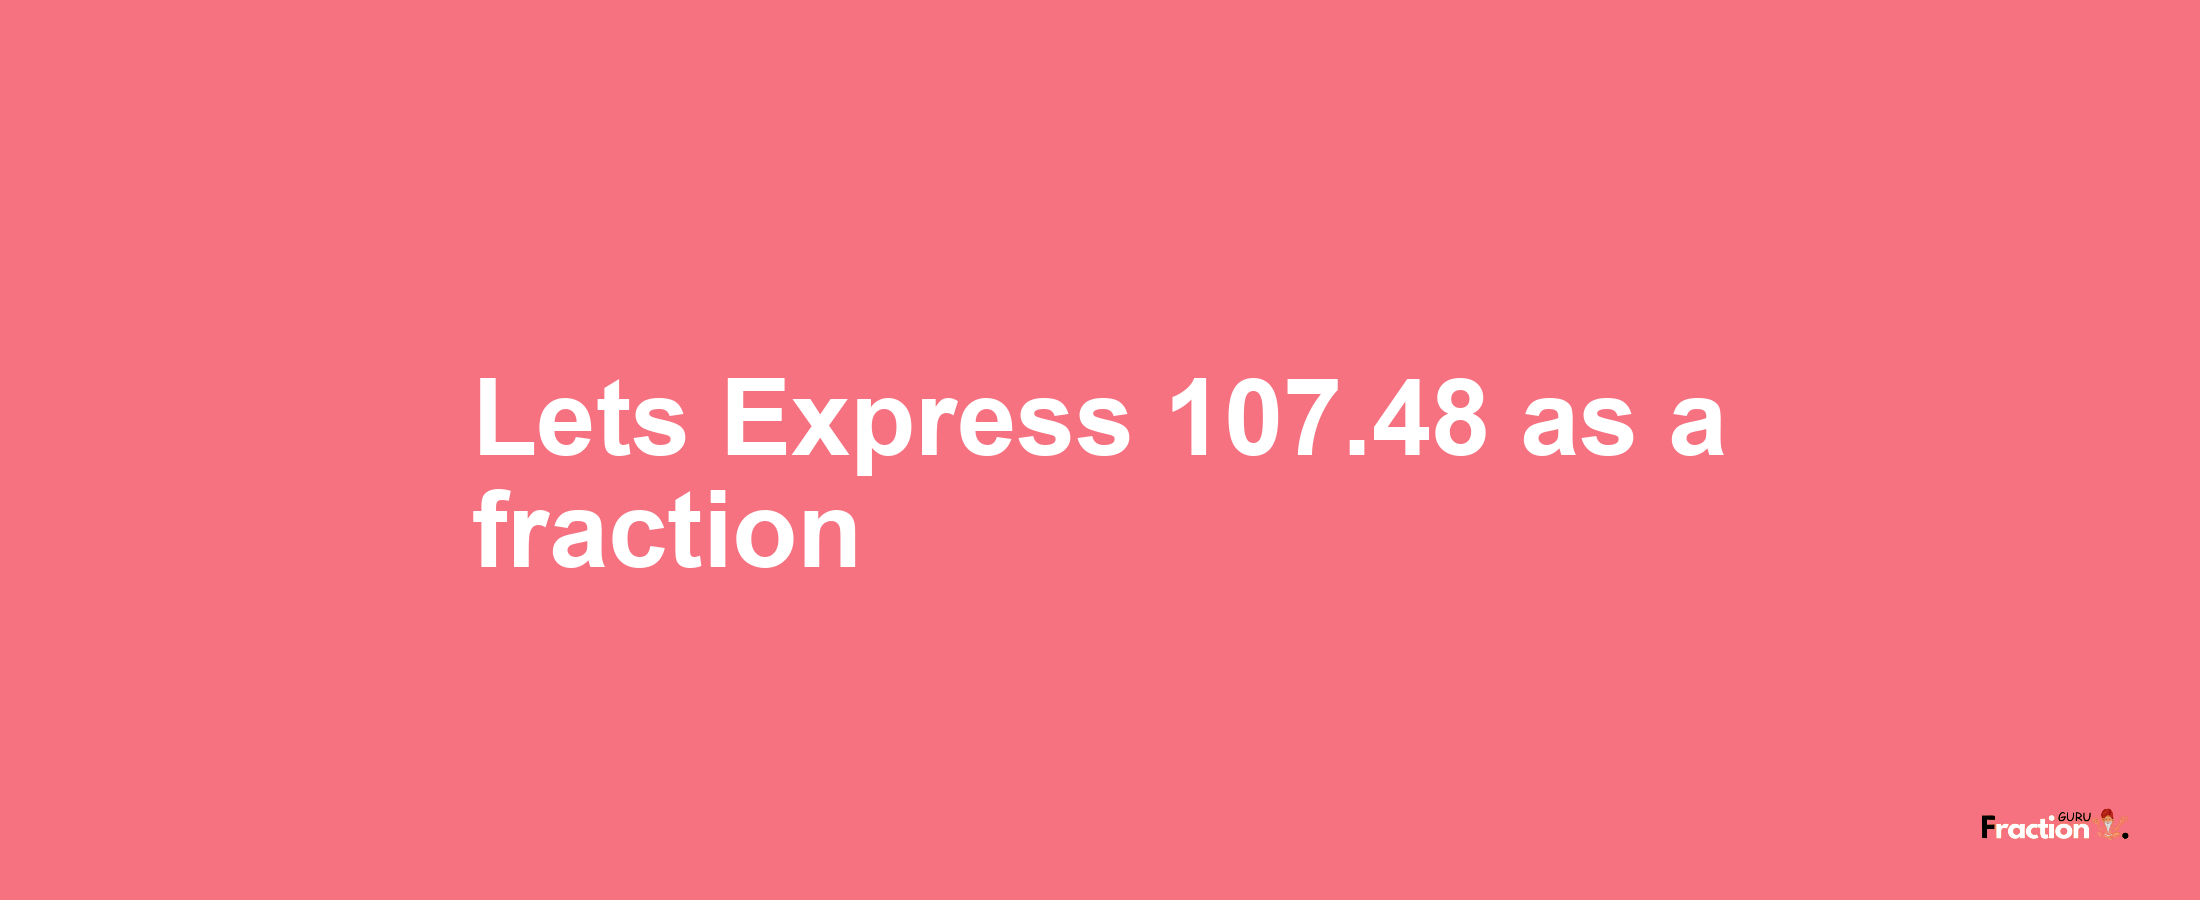 Lets Express 107.48 as afraction